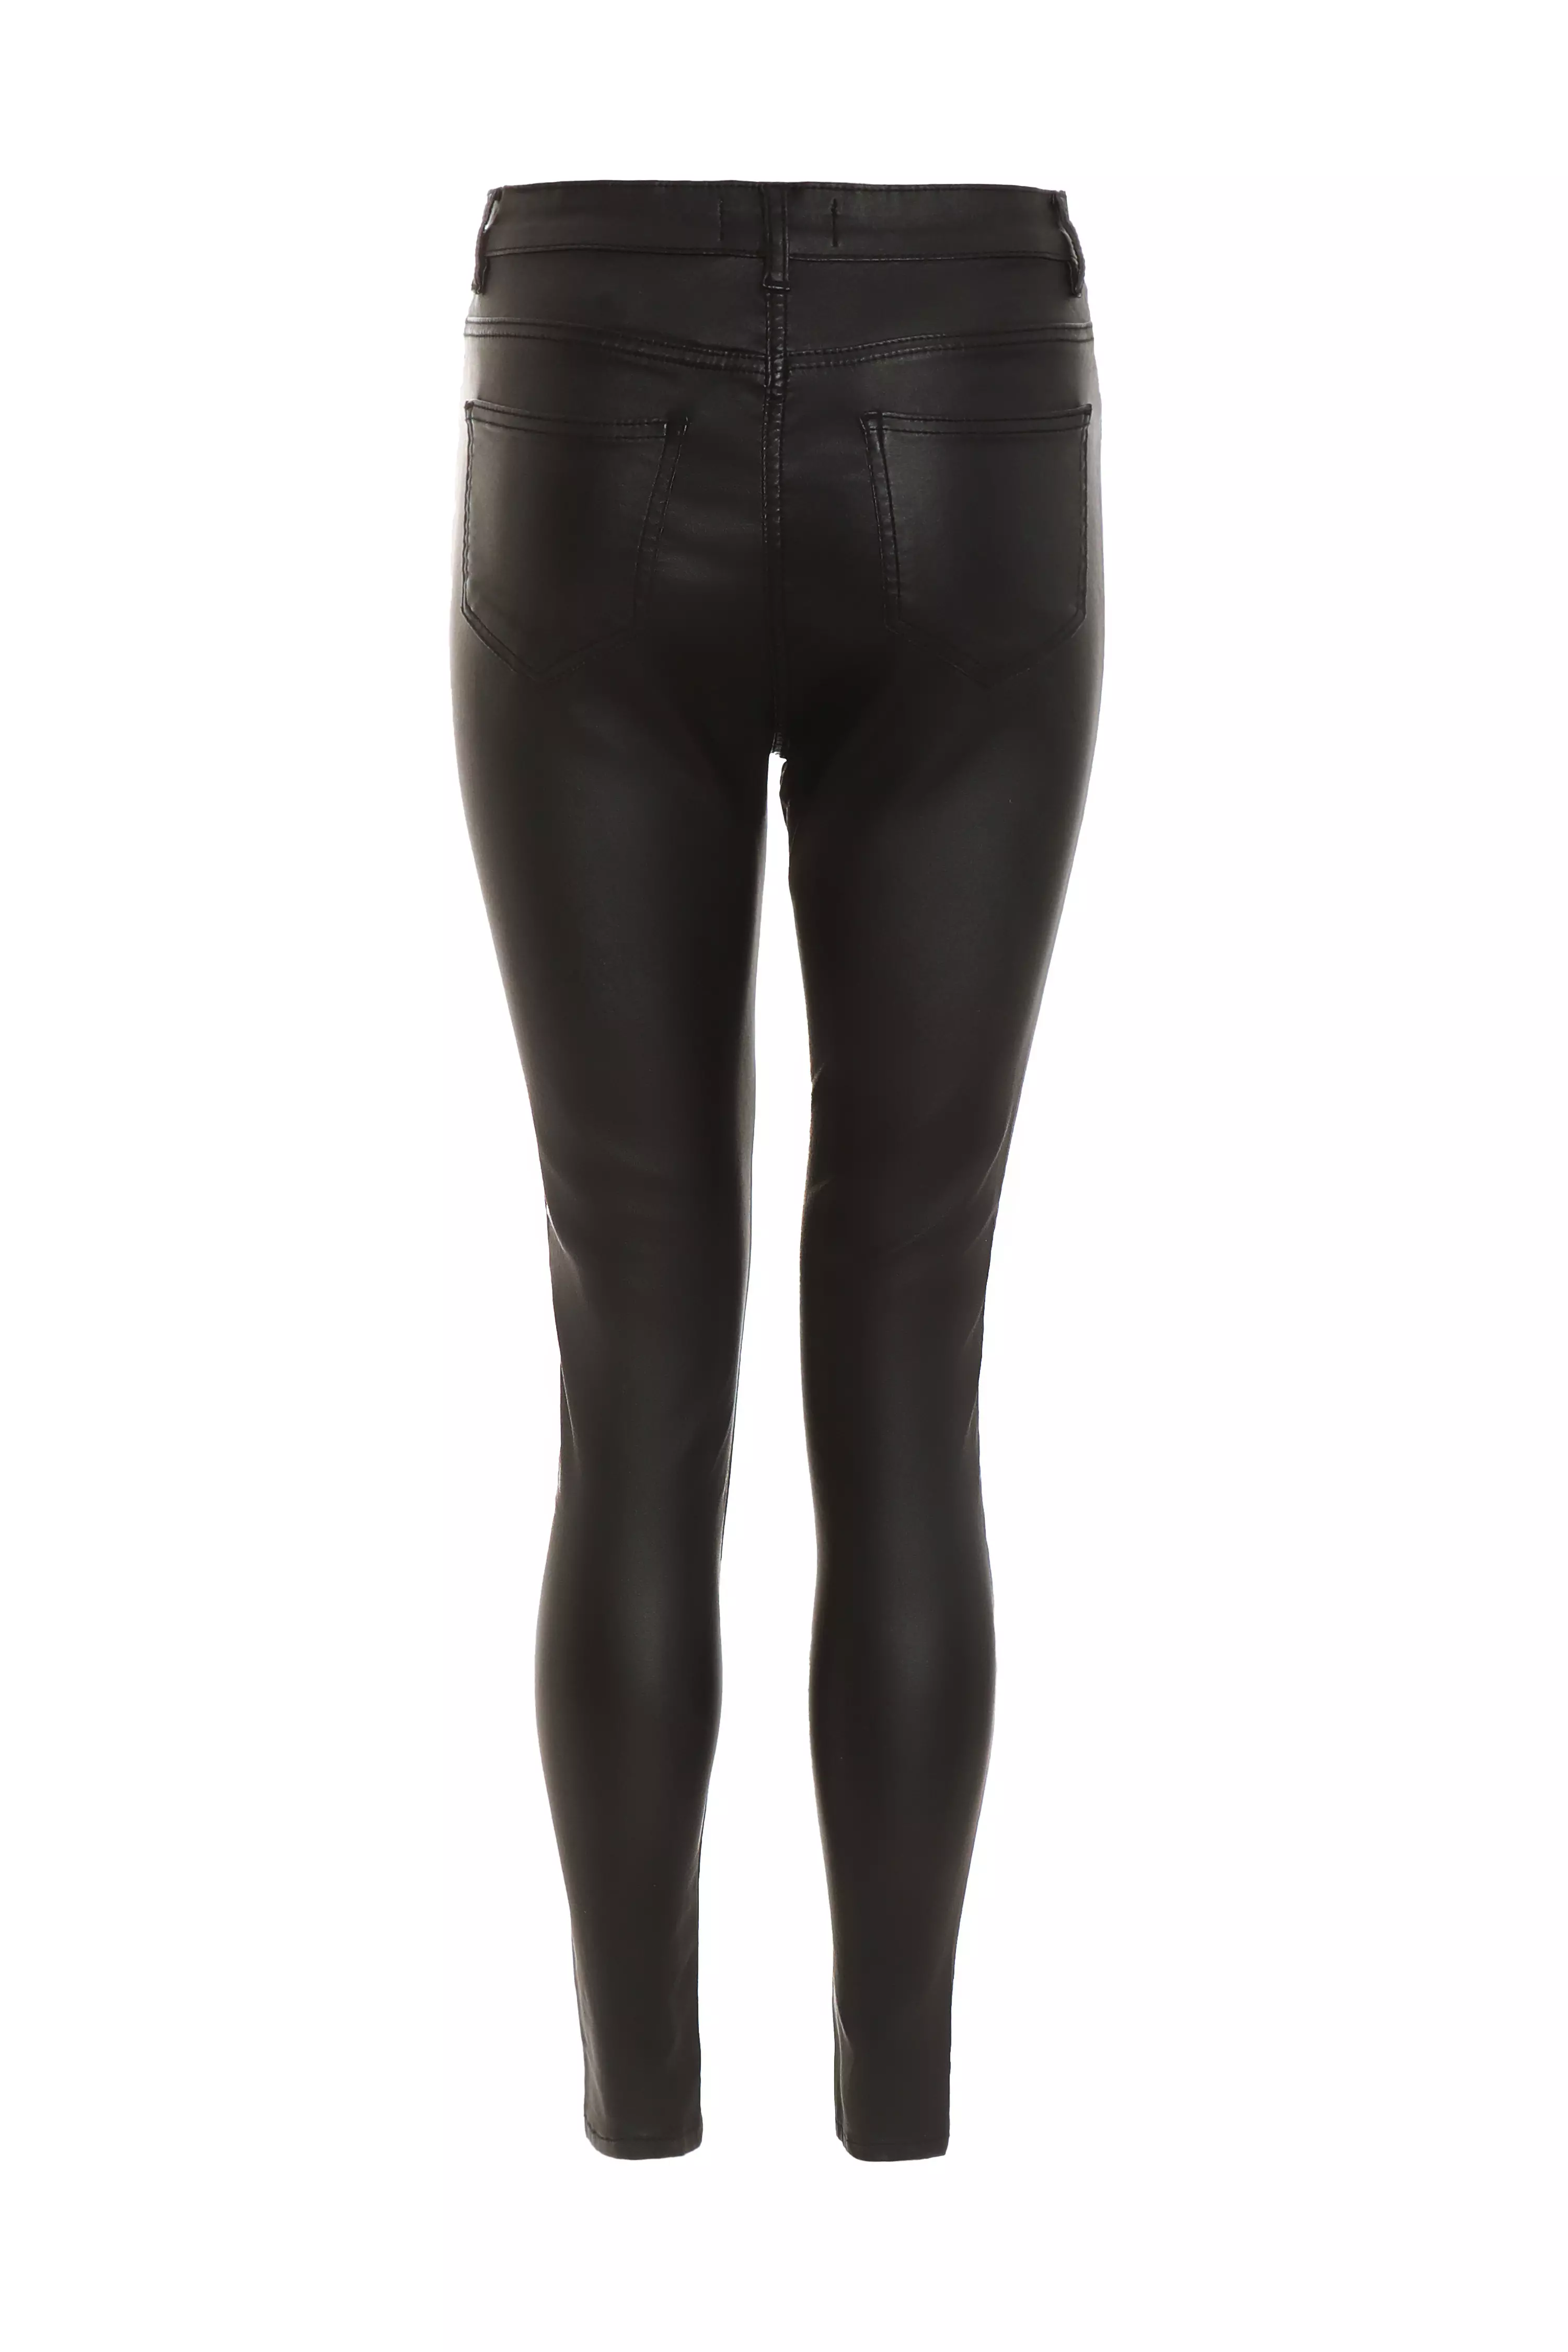 Petite Black Faux Leather Skinny Jeans - QUIZ Clothing